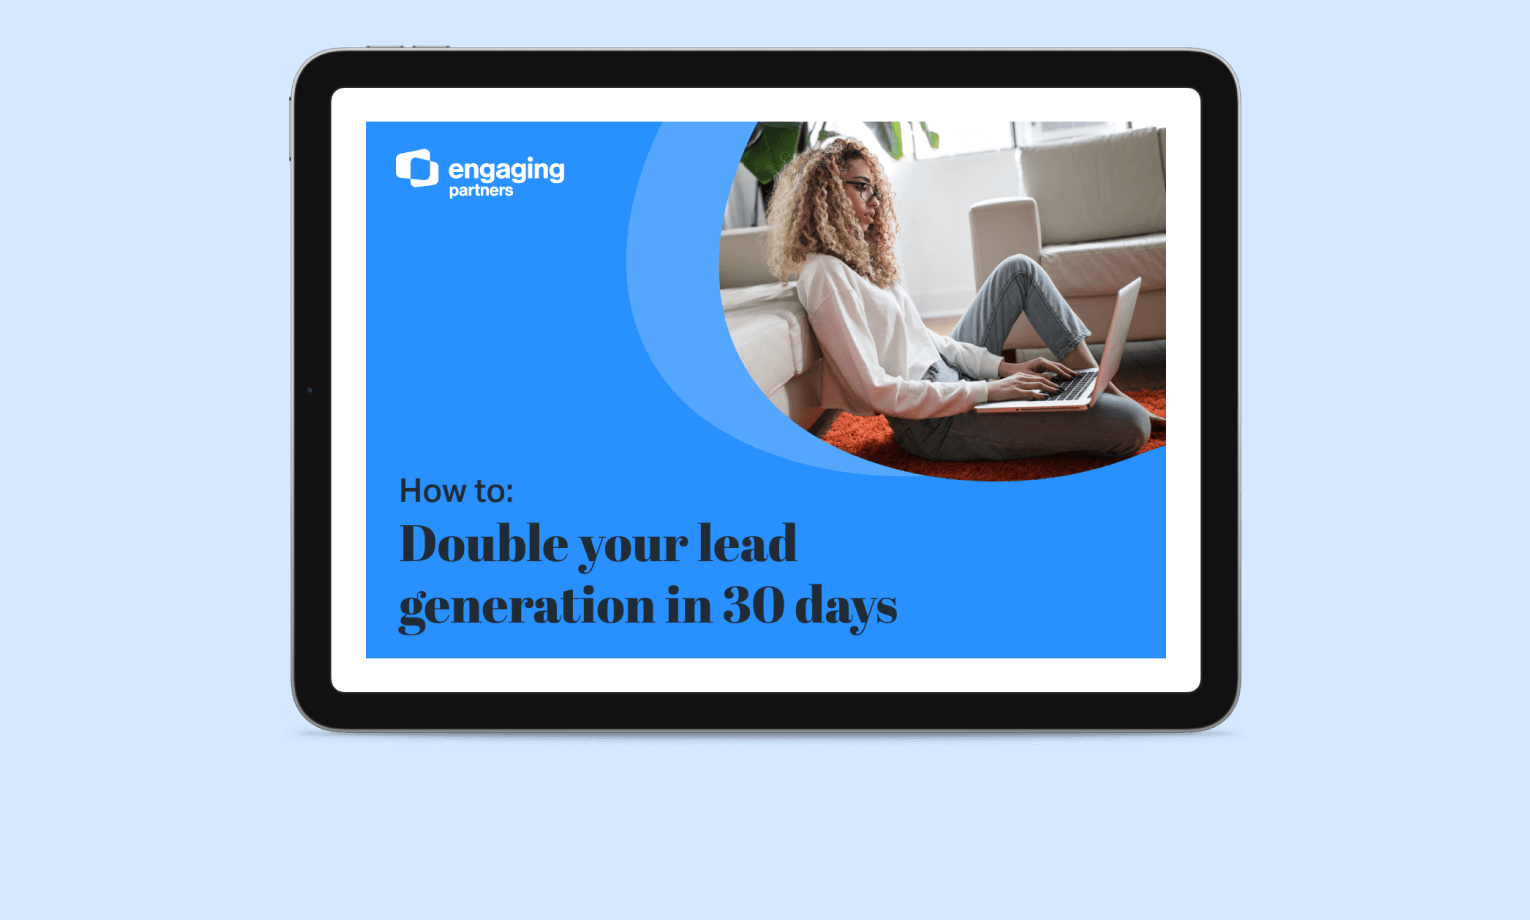 How to: double your lead generation in 30 days